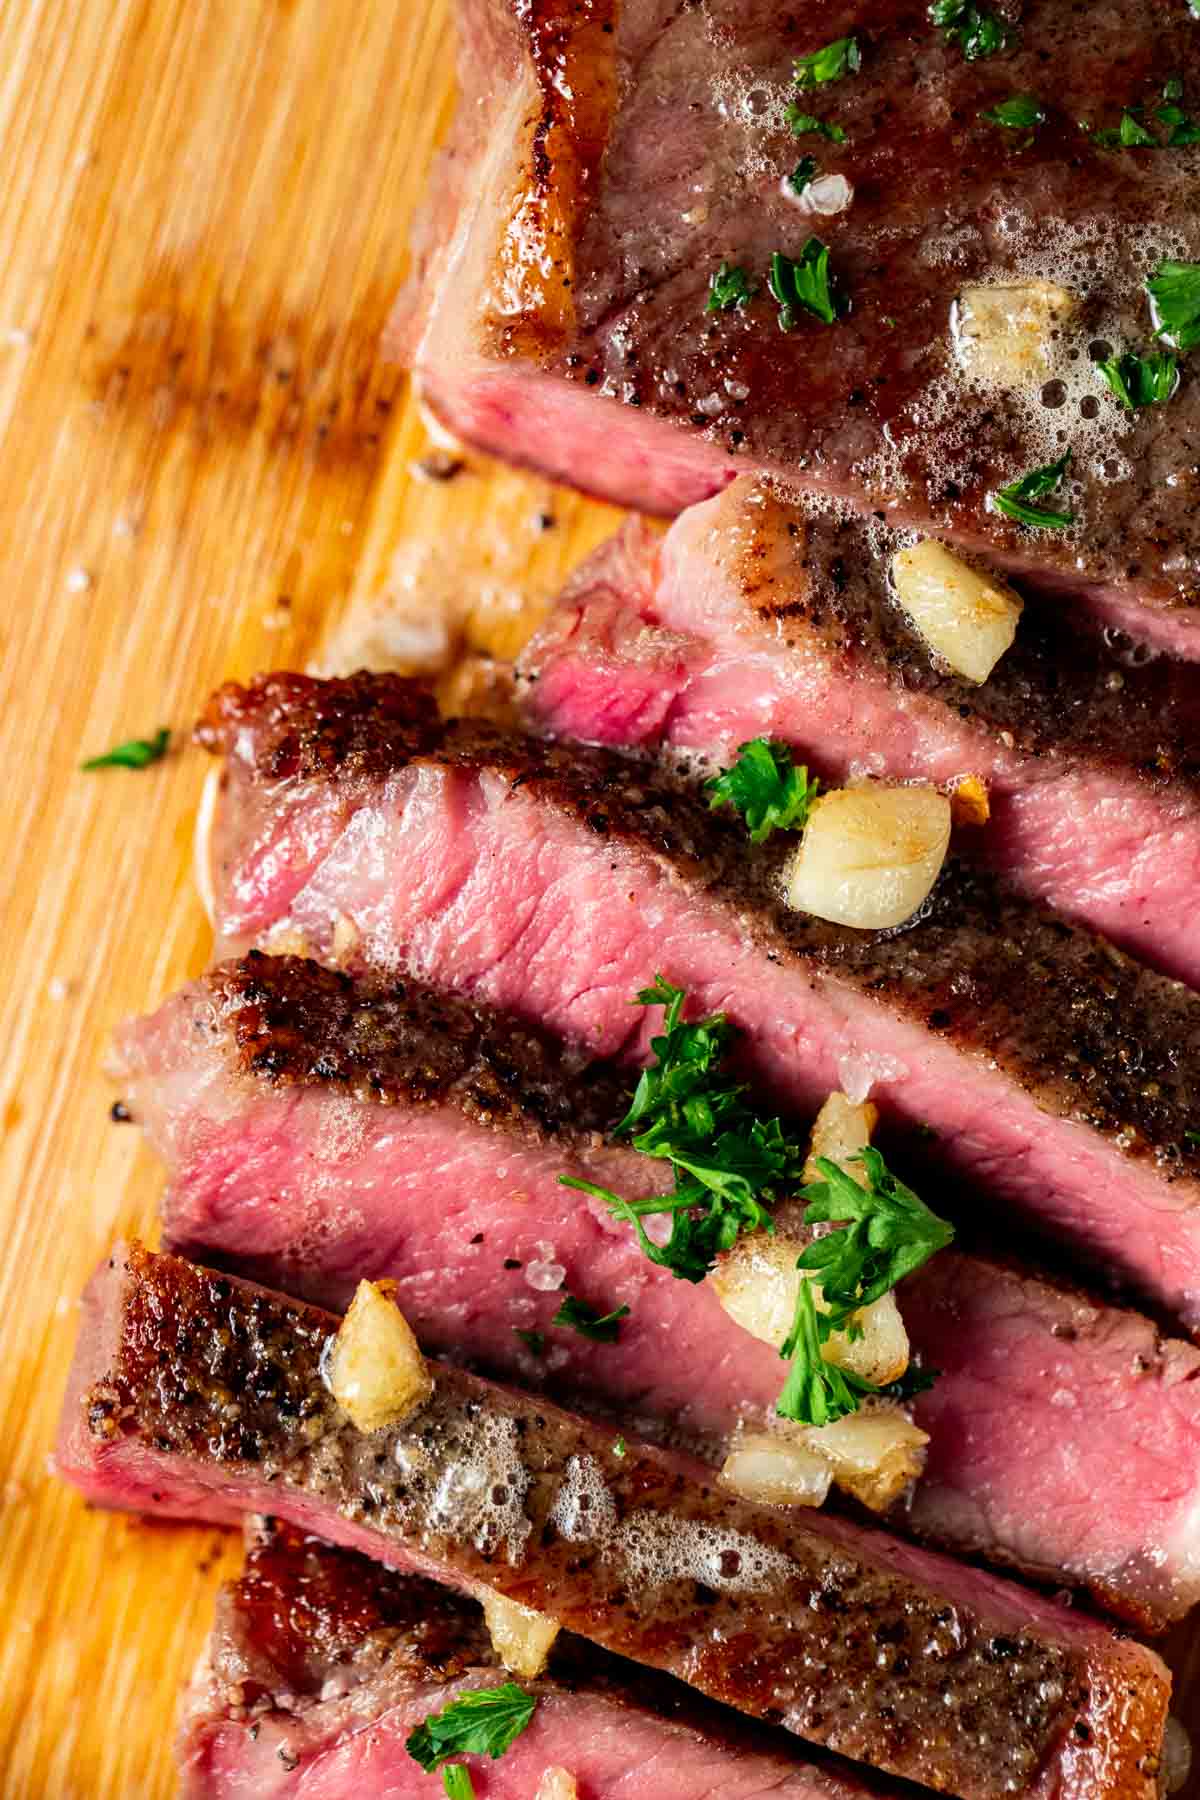 Medium rare steak cut into slices and topped with chopped herbs.